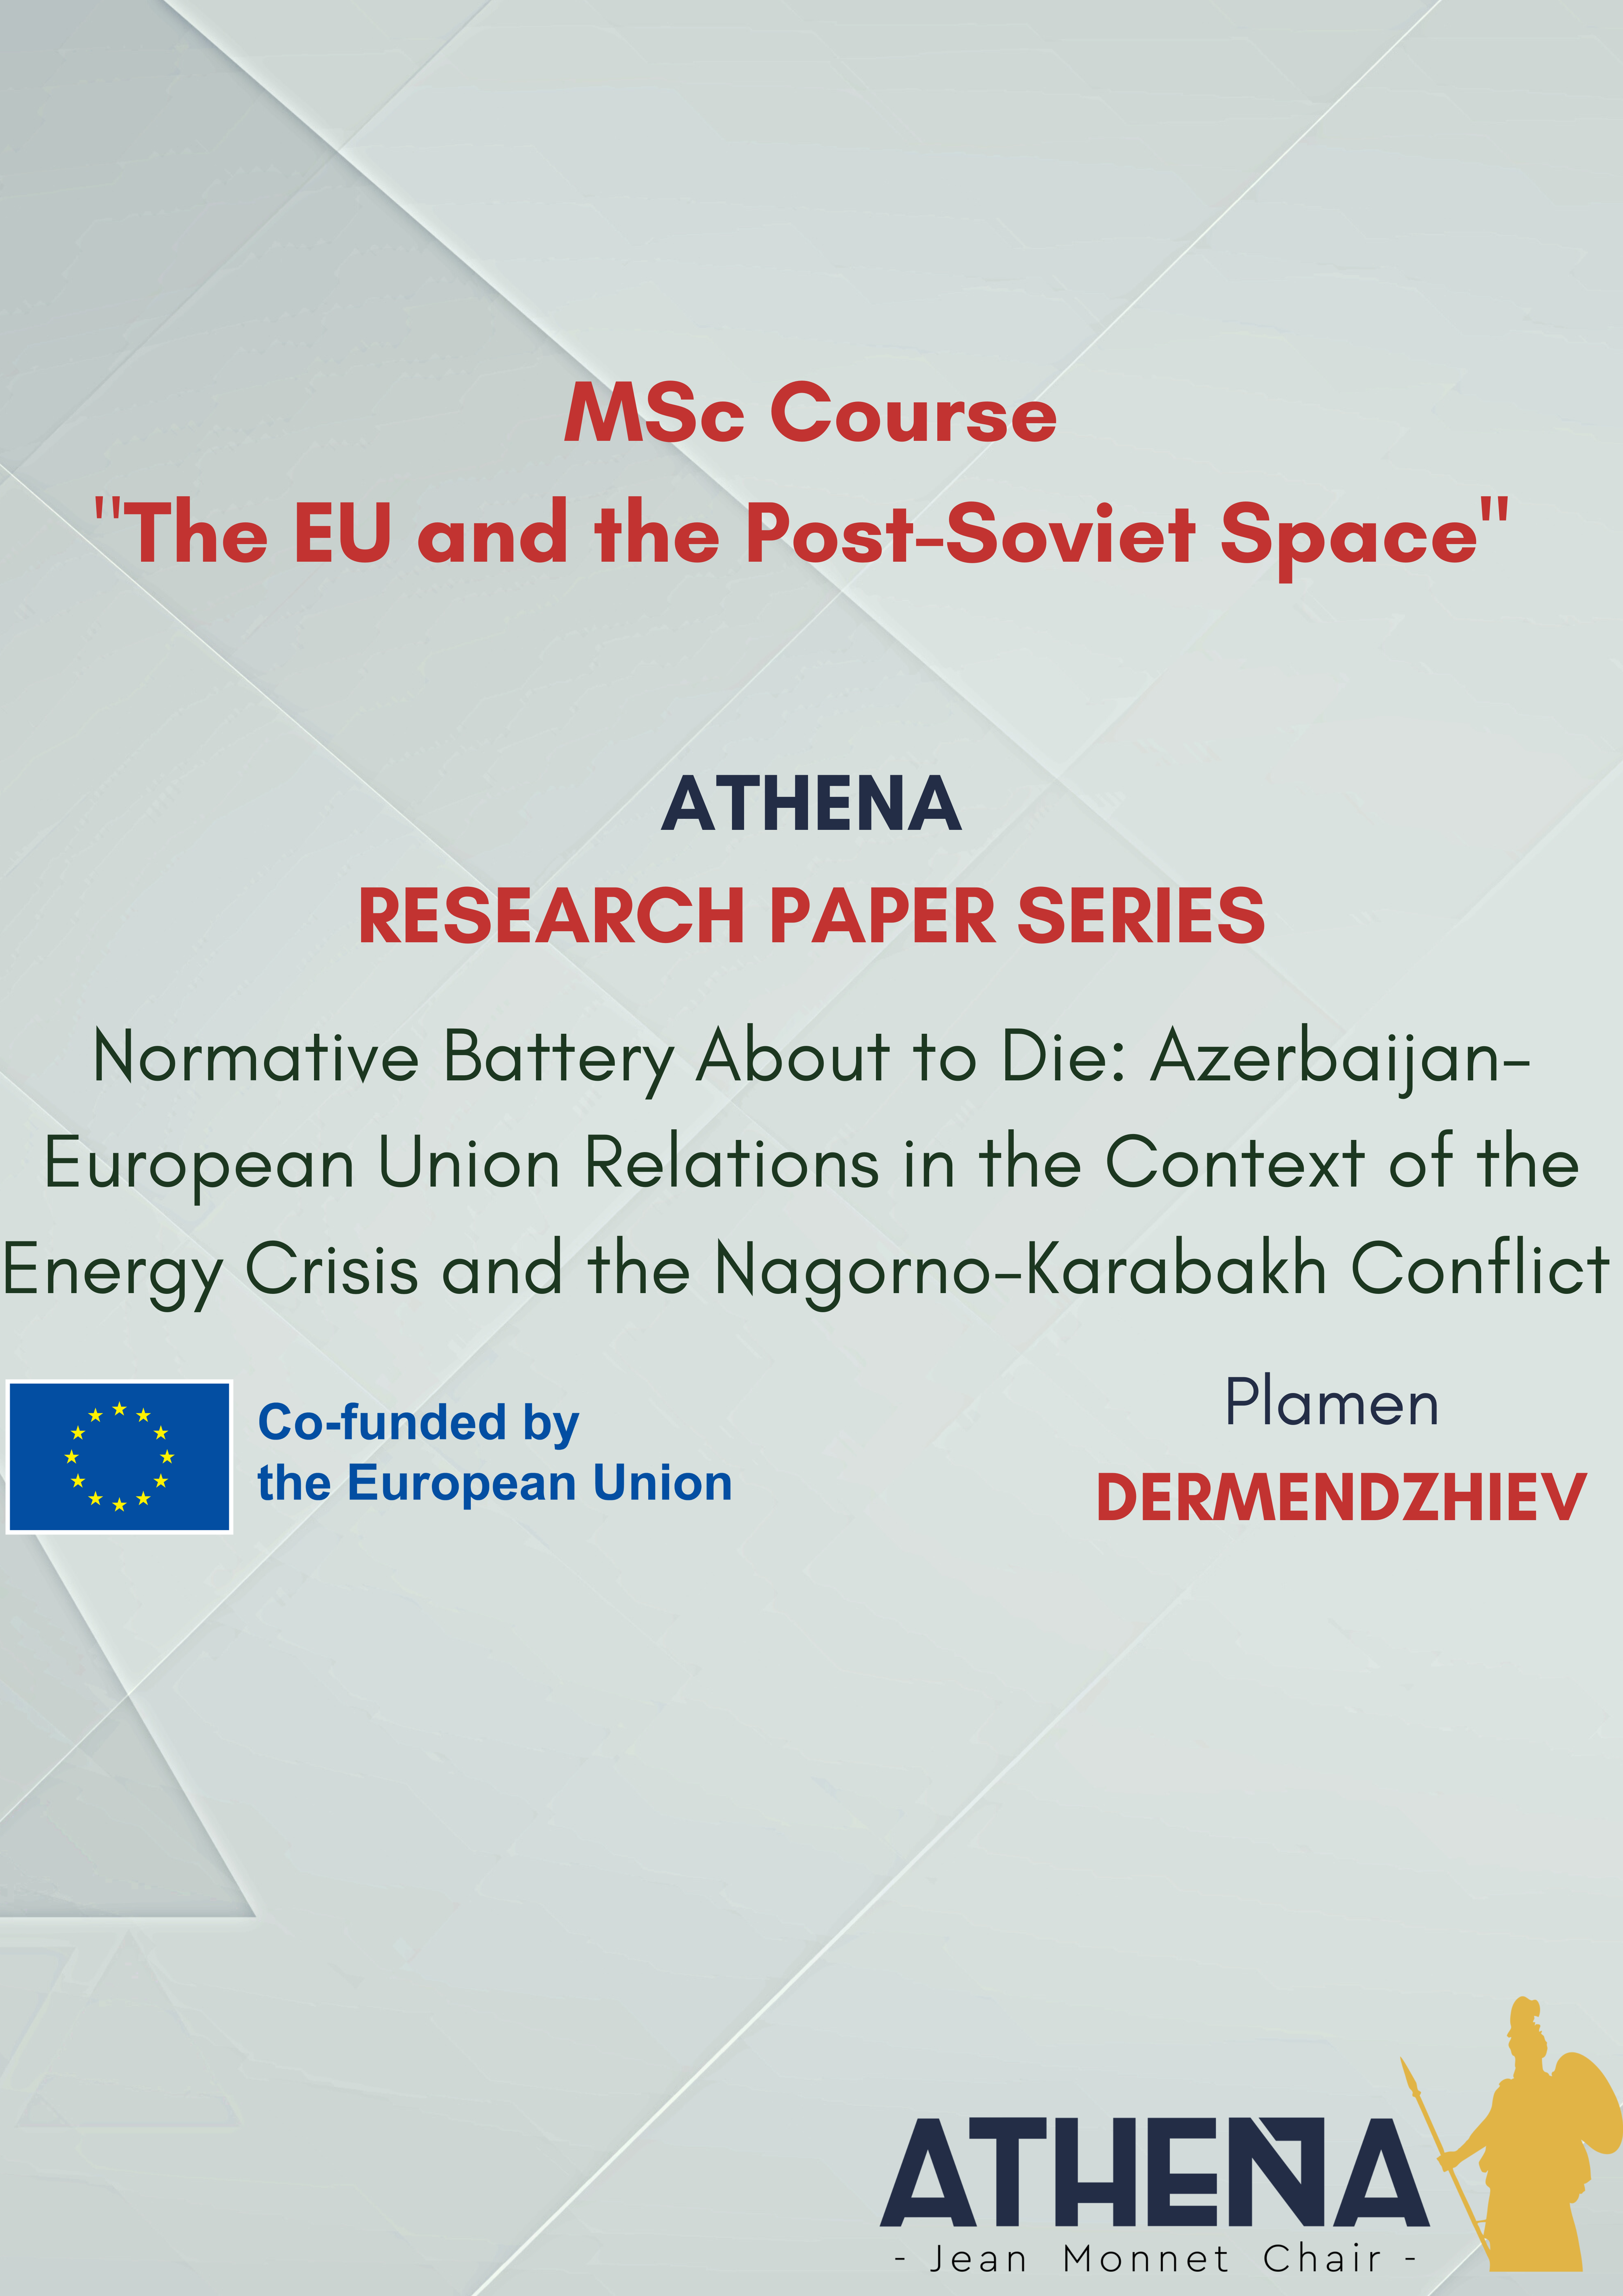 RESEARCH PAPER Nº7: “NORMATIVE BATTERY ABOUT TO DIE: AZERBAIJAN-EUROPEAN UNION RELATIONS IN THE CONTEXT OF THE ENERGY CRISIS AND THE NAGORNO-KARABAKH CONFLICT”